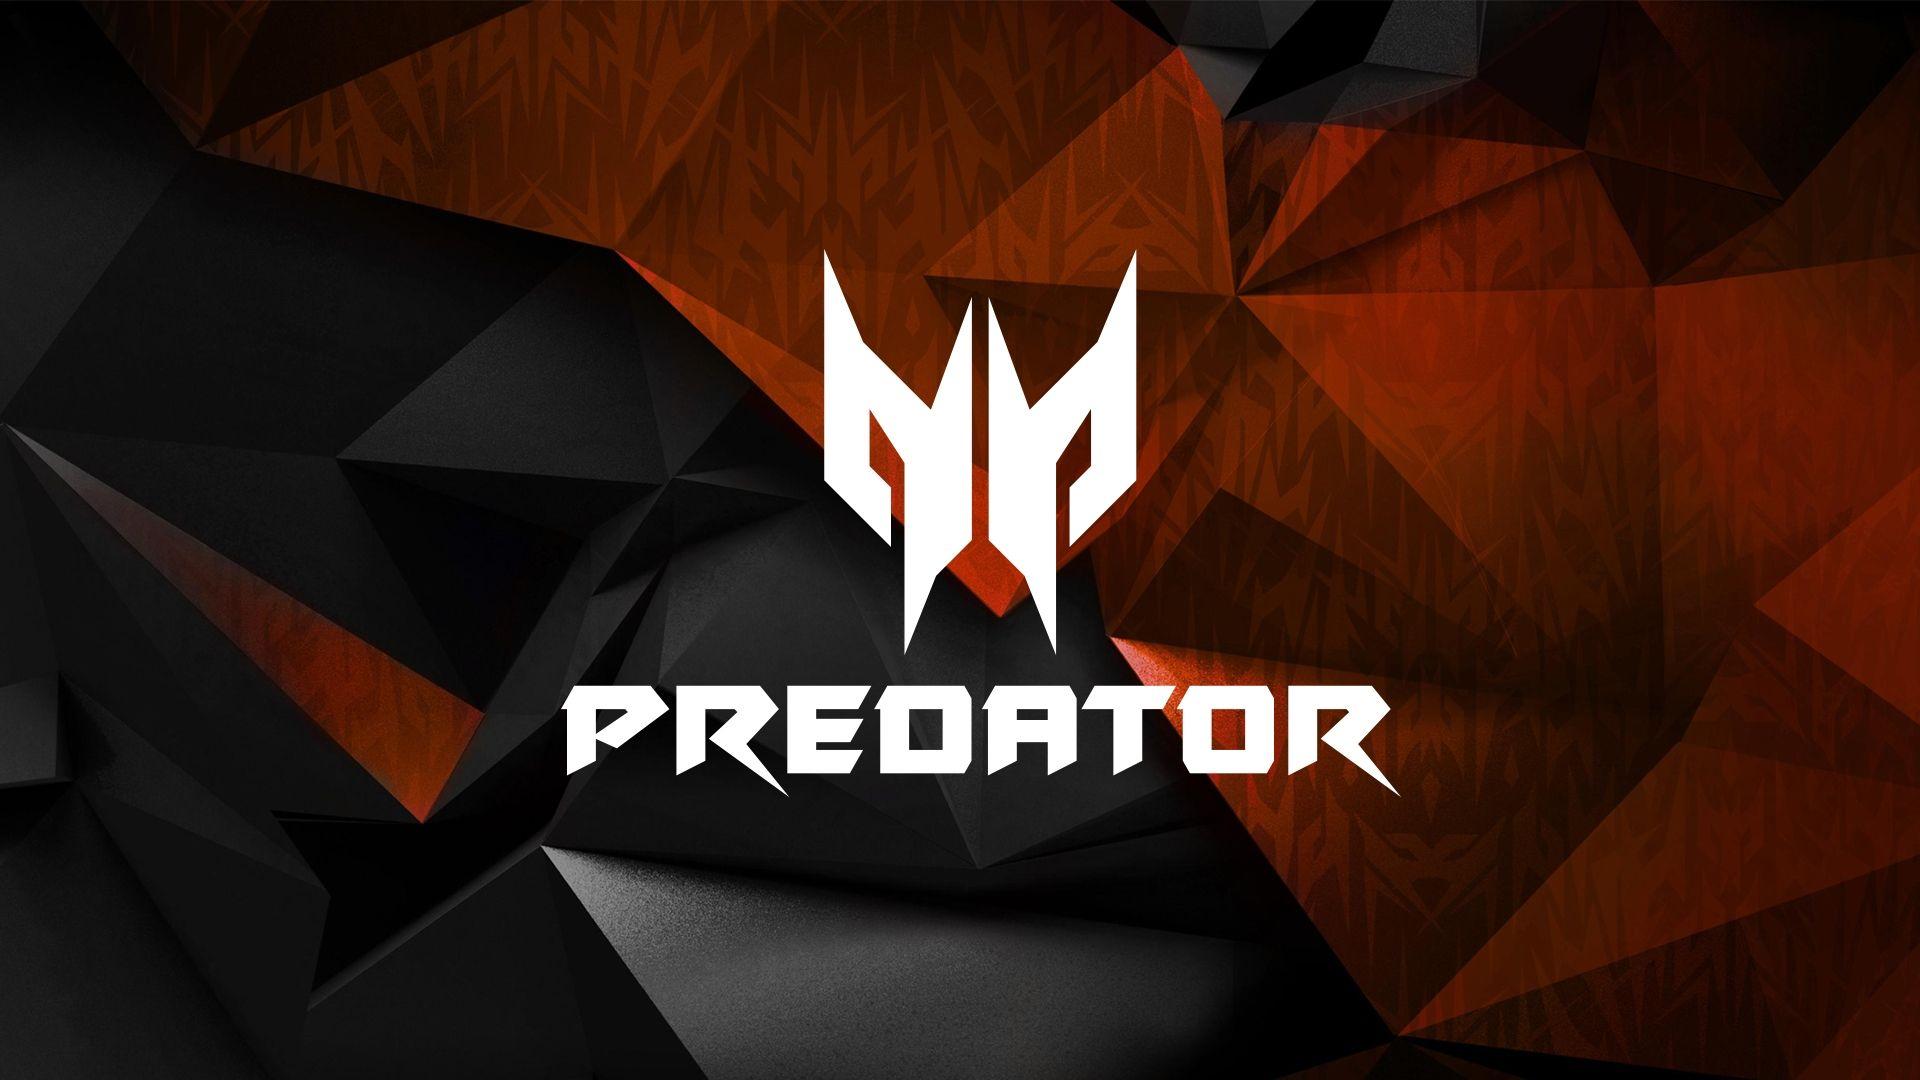 Acer Gaming Logo - acer-predator-logo-abstract-1426 : Free Download, Borrow, and ...